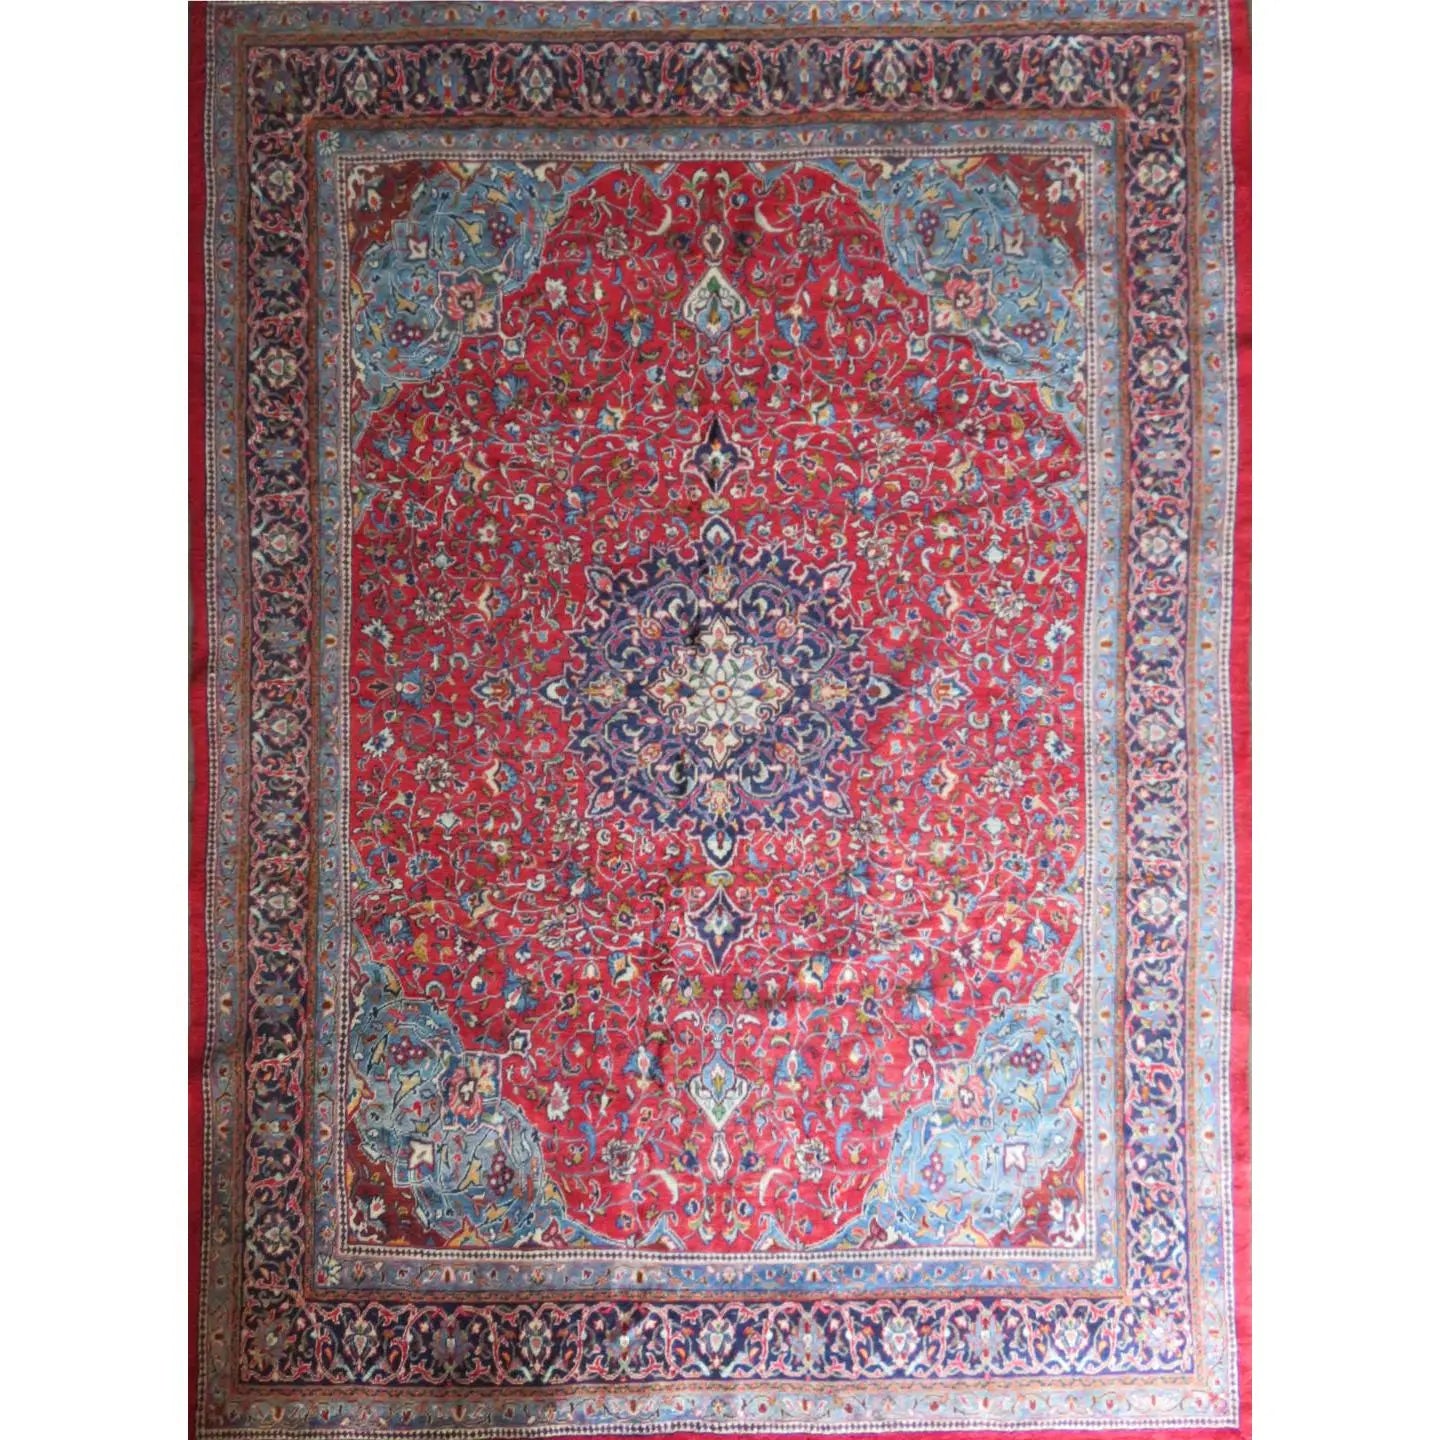 Hand-Knotted Persian Wool Rug – Luxurious Vintage Design, 13'7" x 9'7", Artisan Crafted